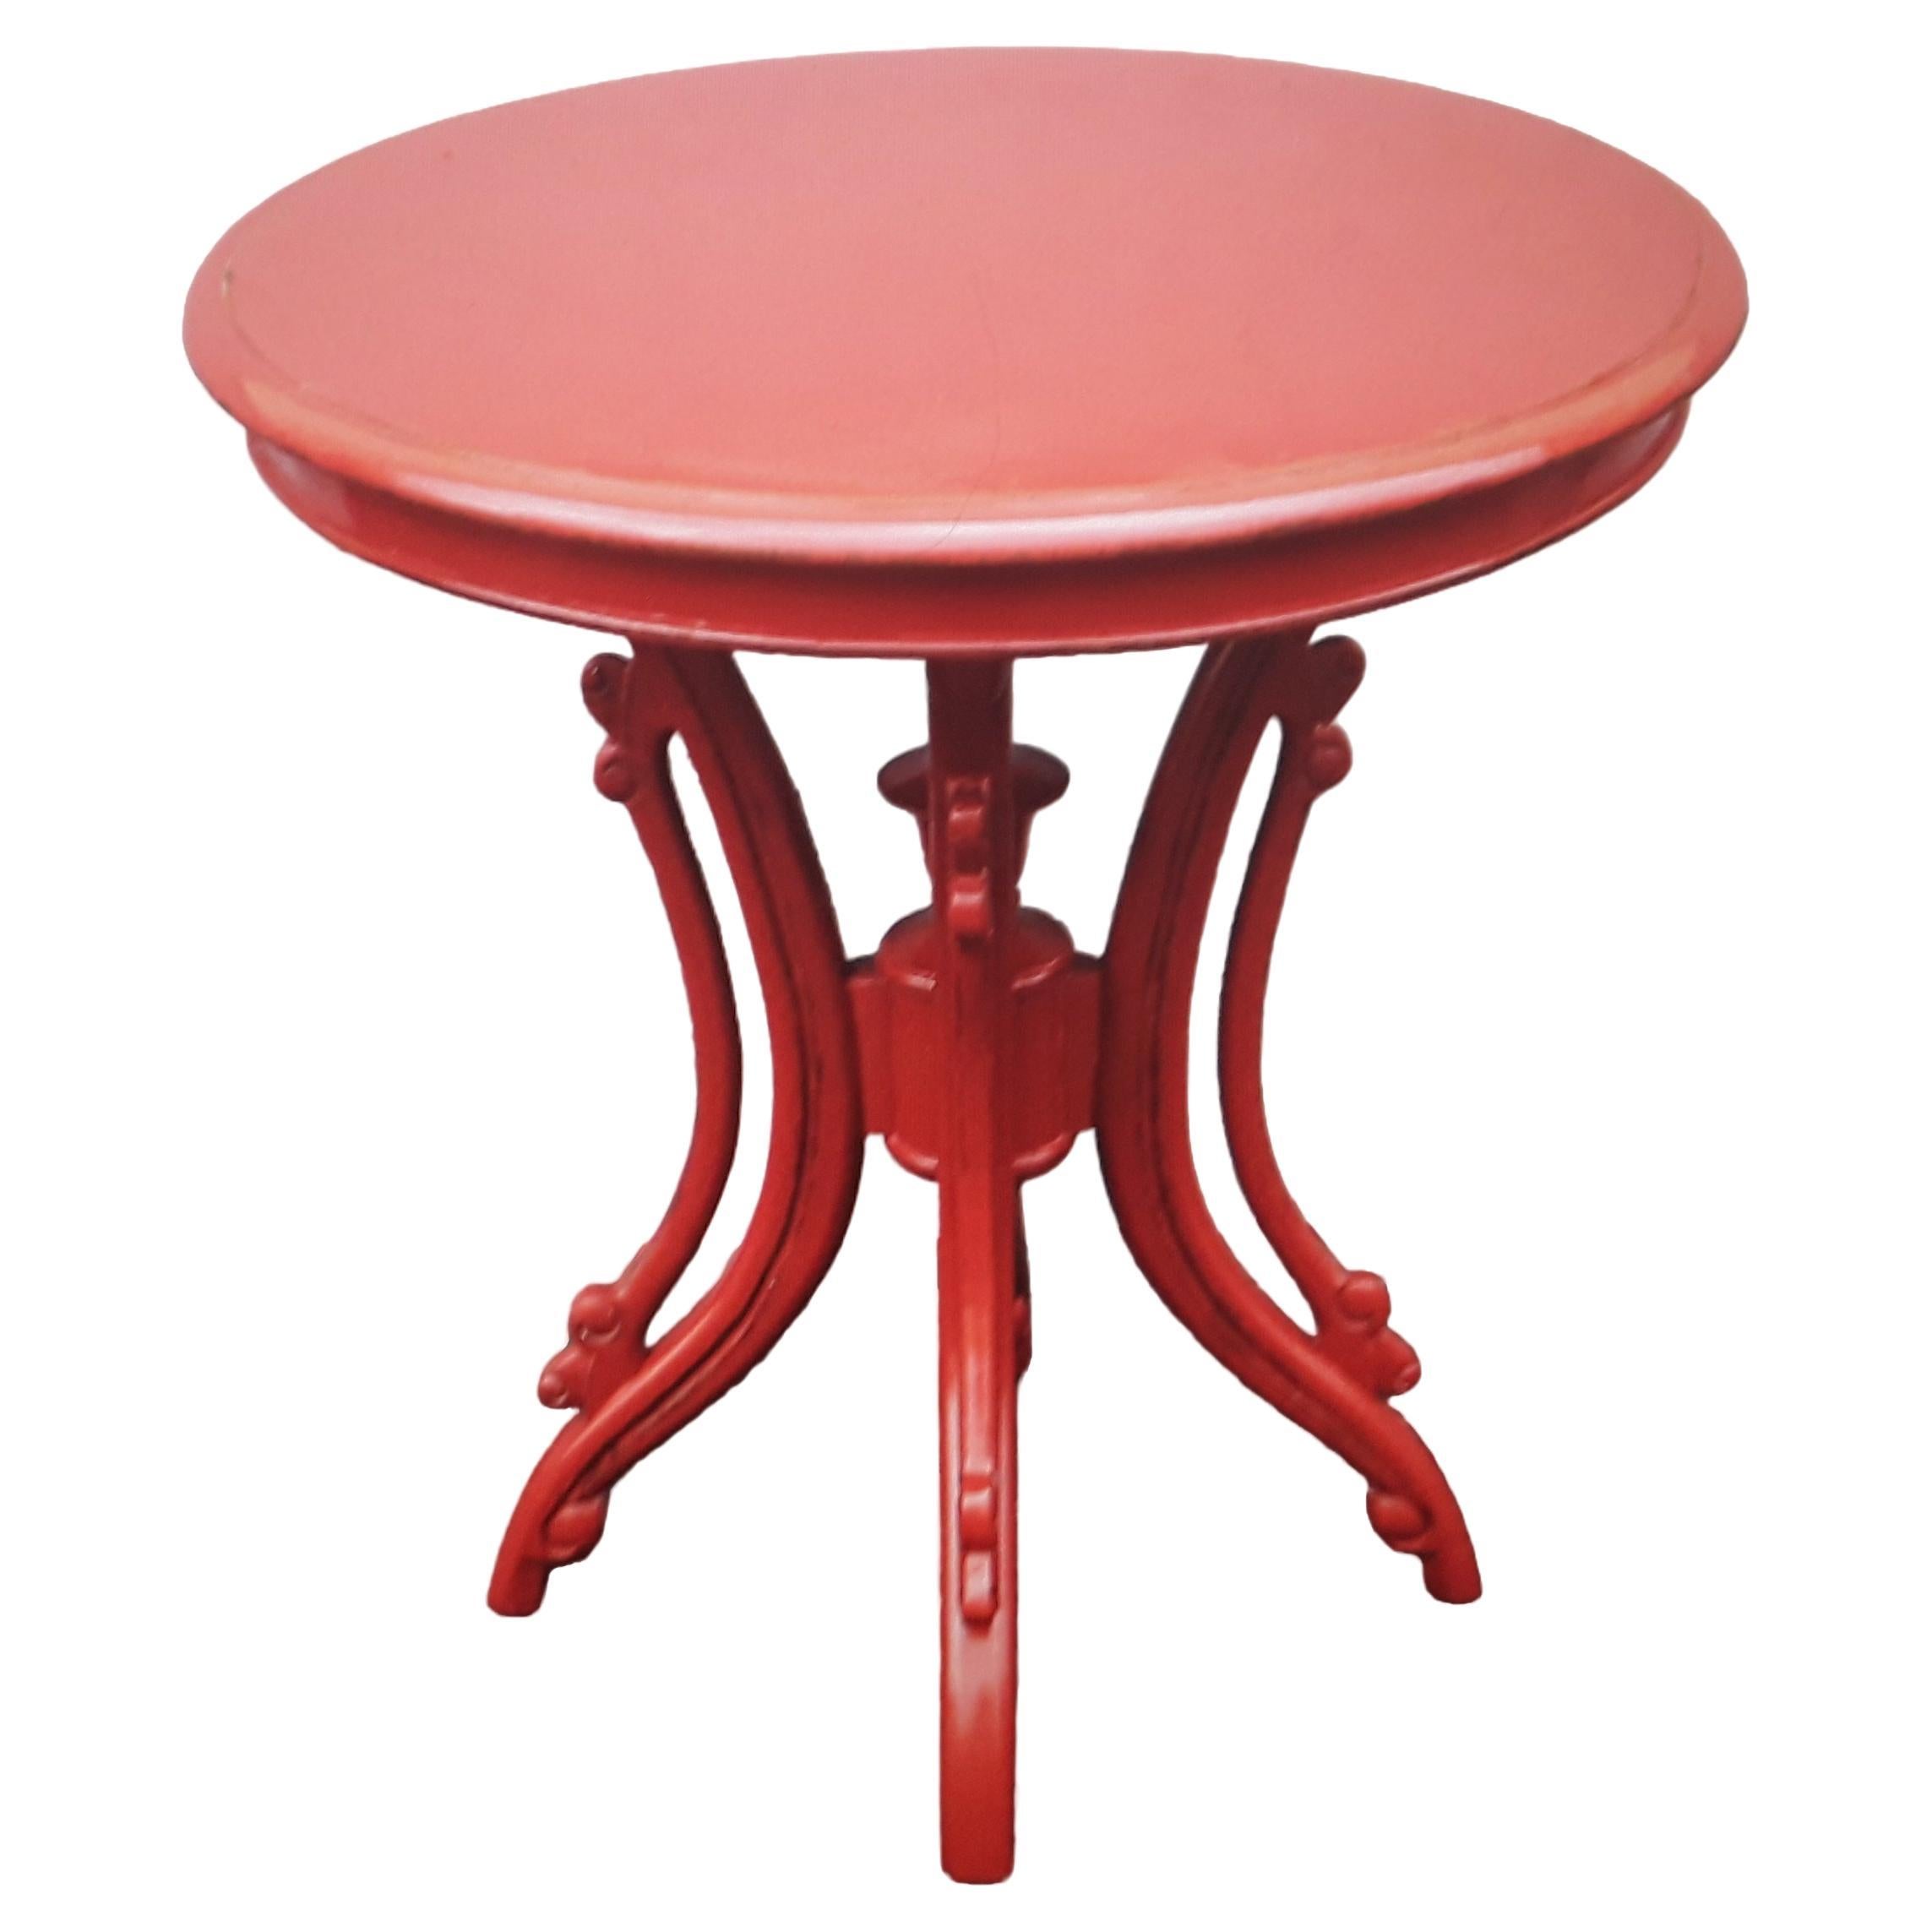 1940's Hollywood Regency Original Red Color Occasional/ Accent/ Side Table